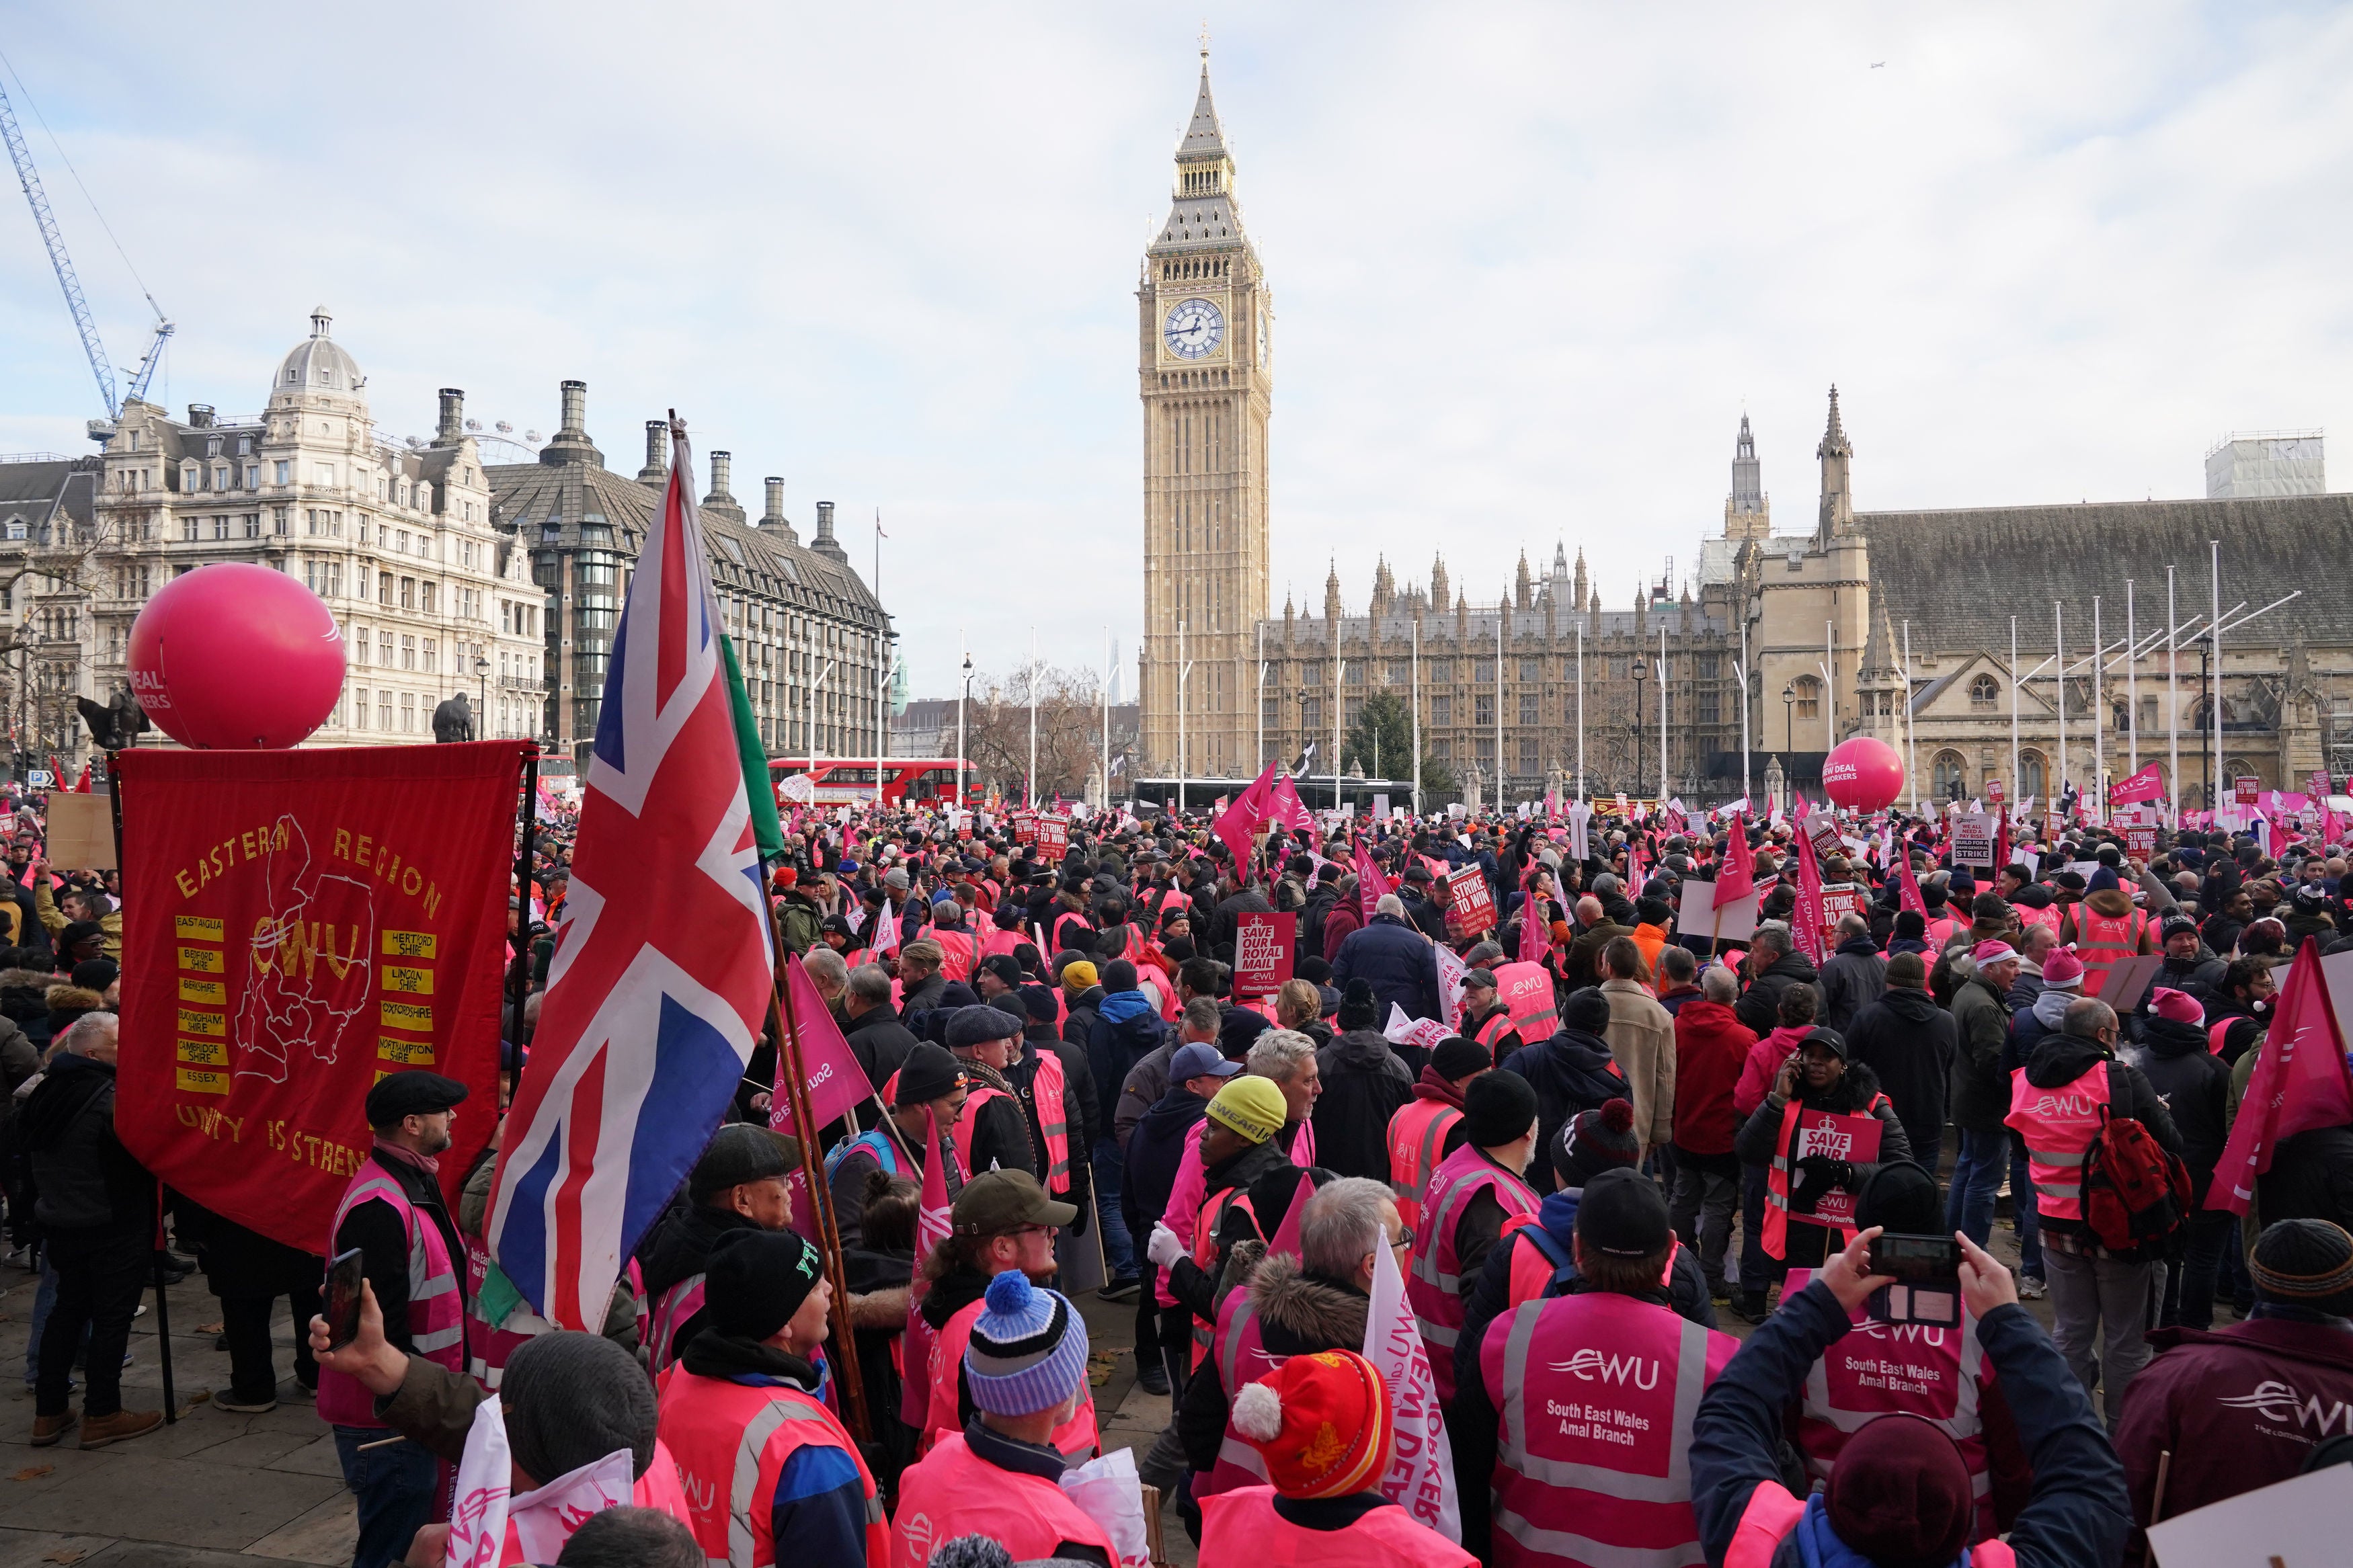 Members of the Communication Workers Union (CWU) hold a rally in Parliament Square